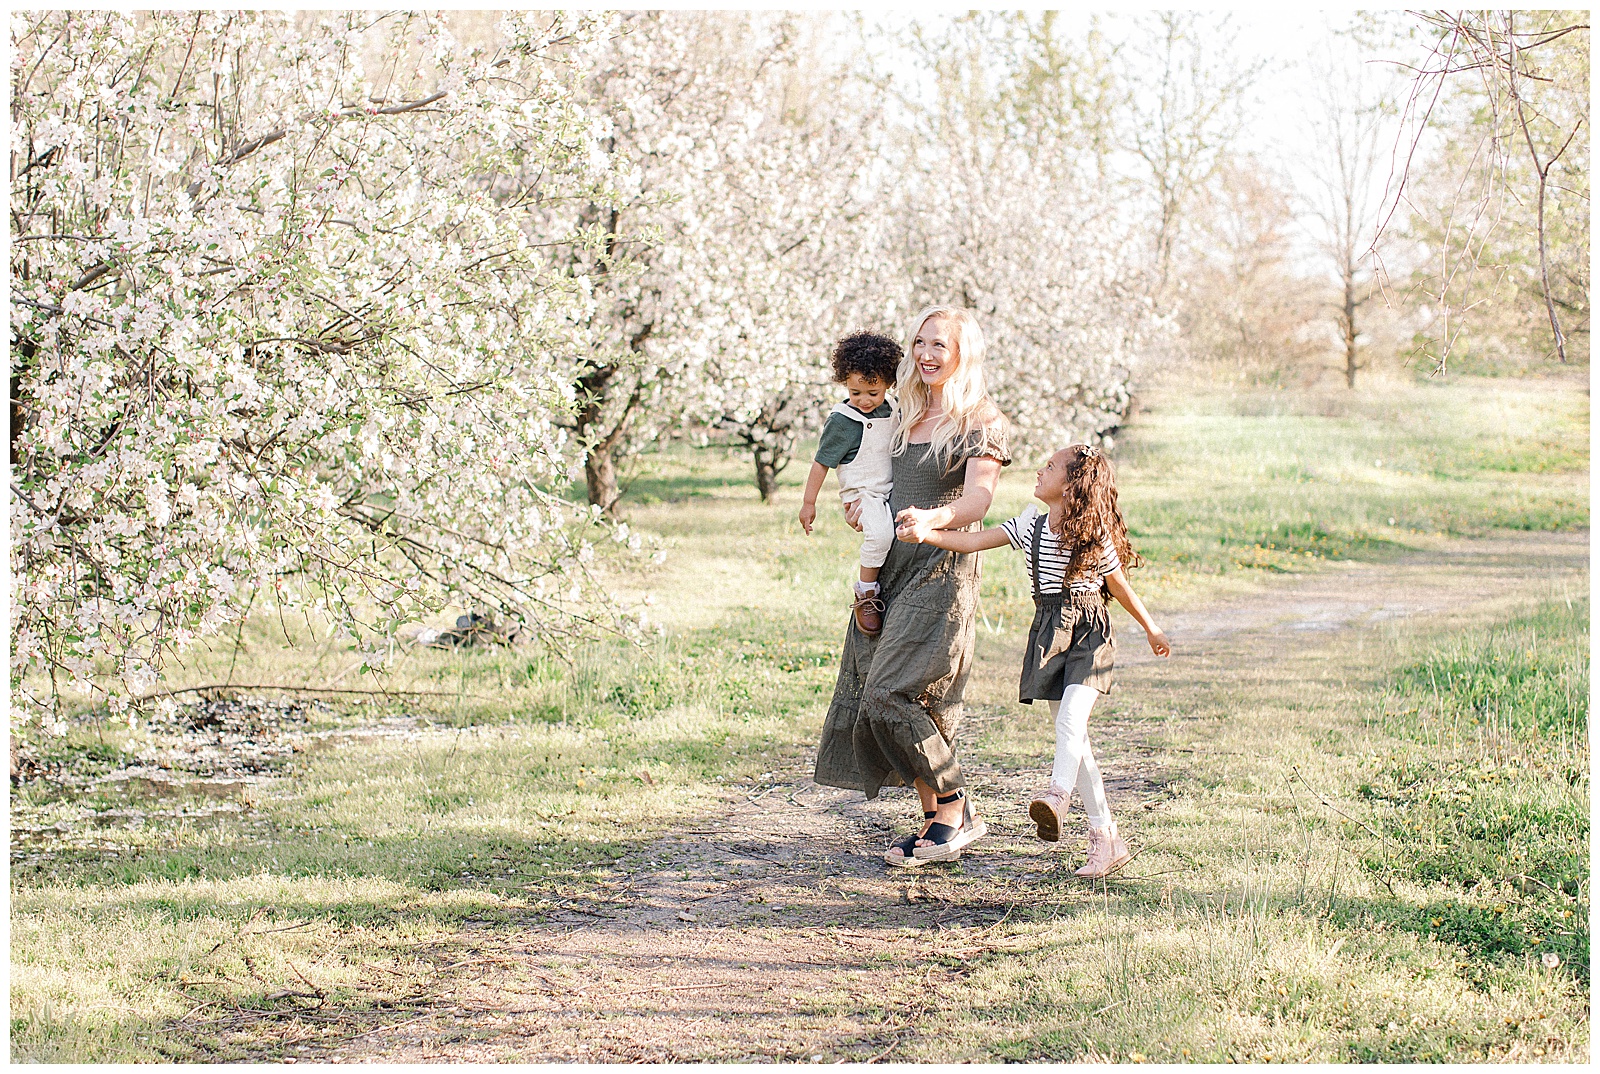 Apple blossom family session at Cider Hill Family Orchard